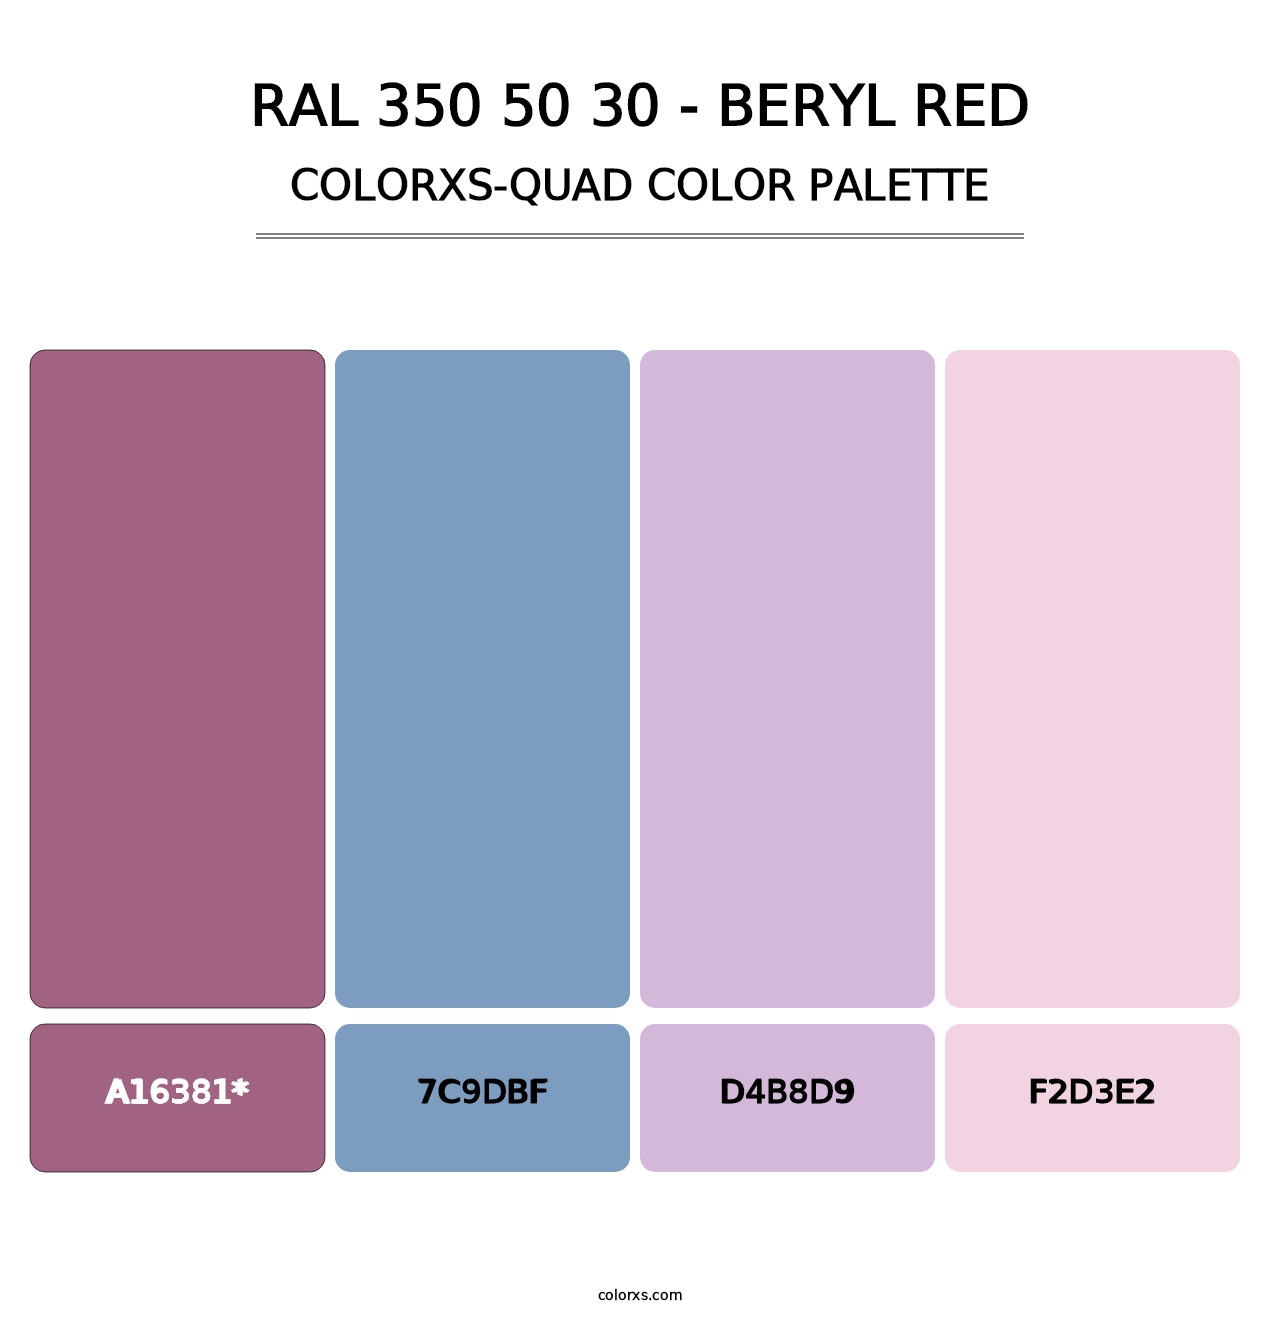 RAL 350 50 30 - Beryl Red - Colorxs Quad Palette